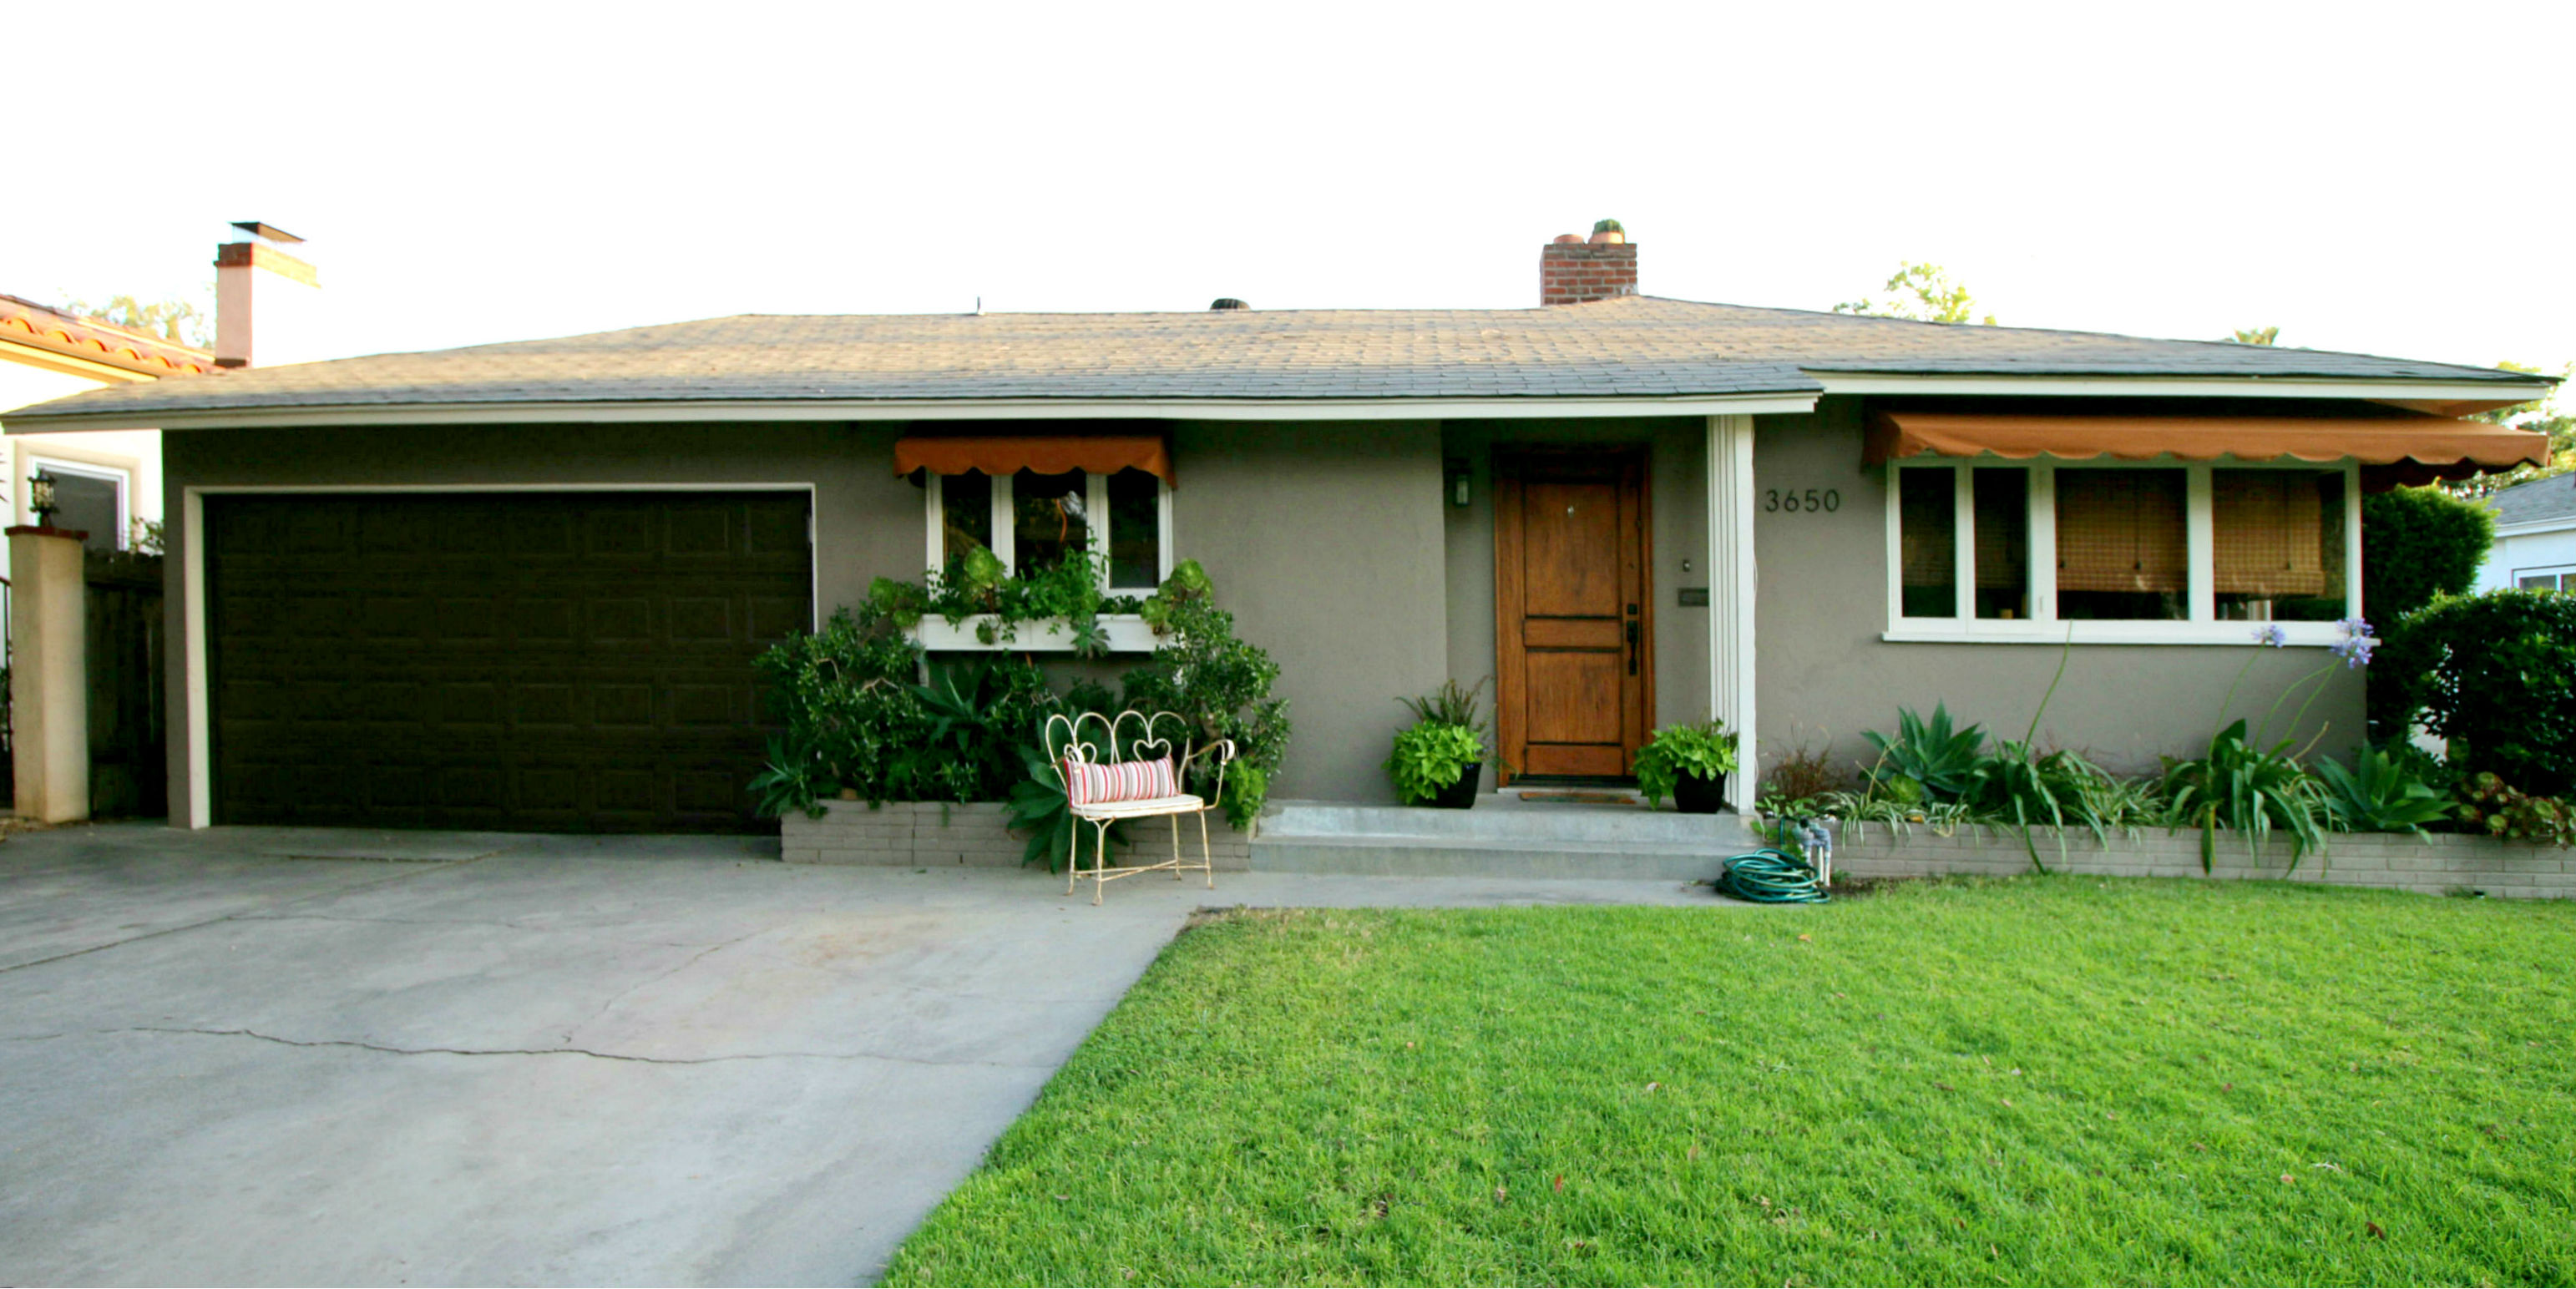 3650 Elmwood Drive, Riverside CA 92506 listed by THE SISTER TEAM